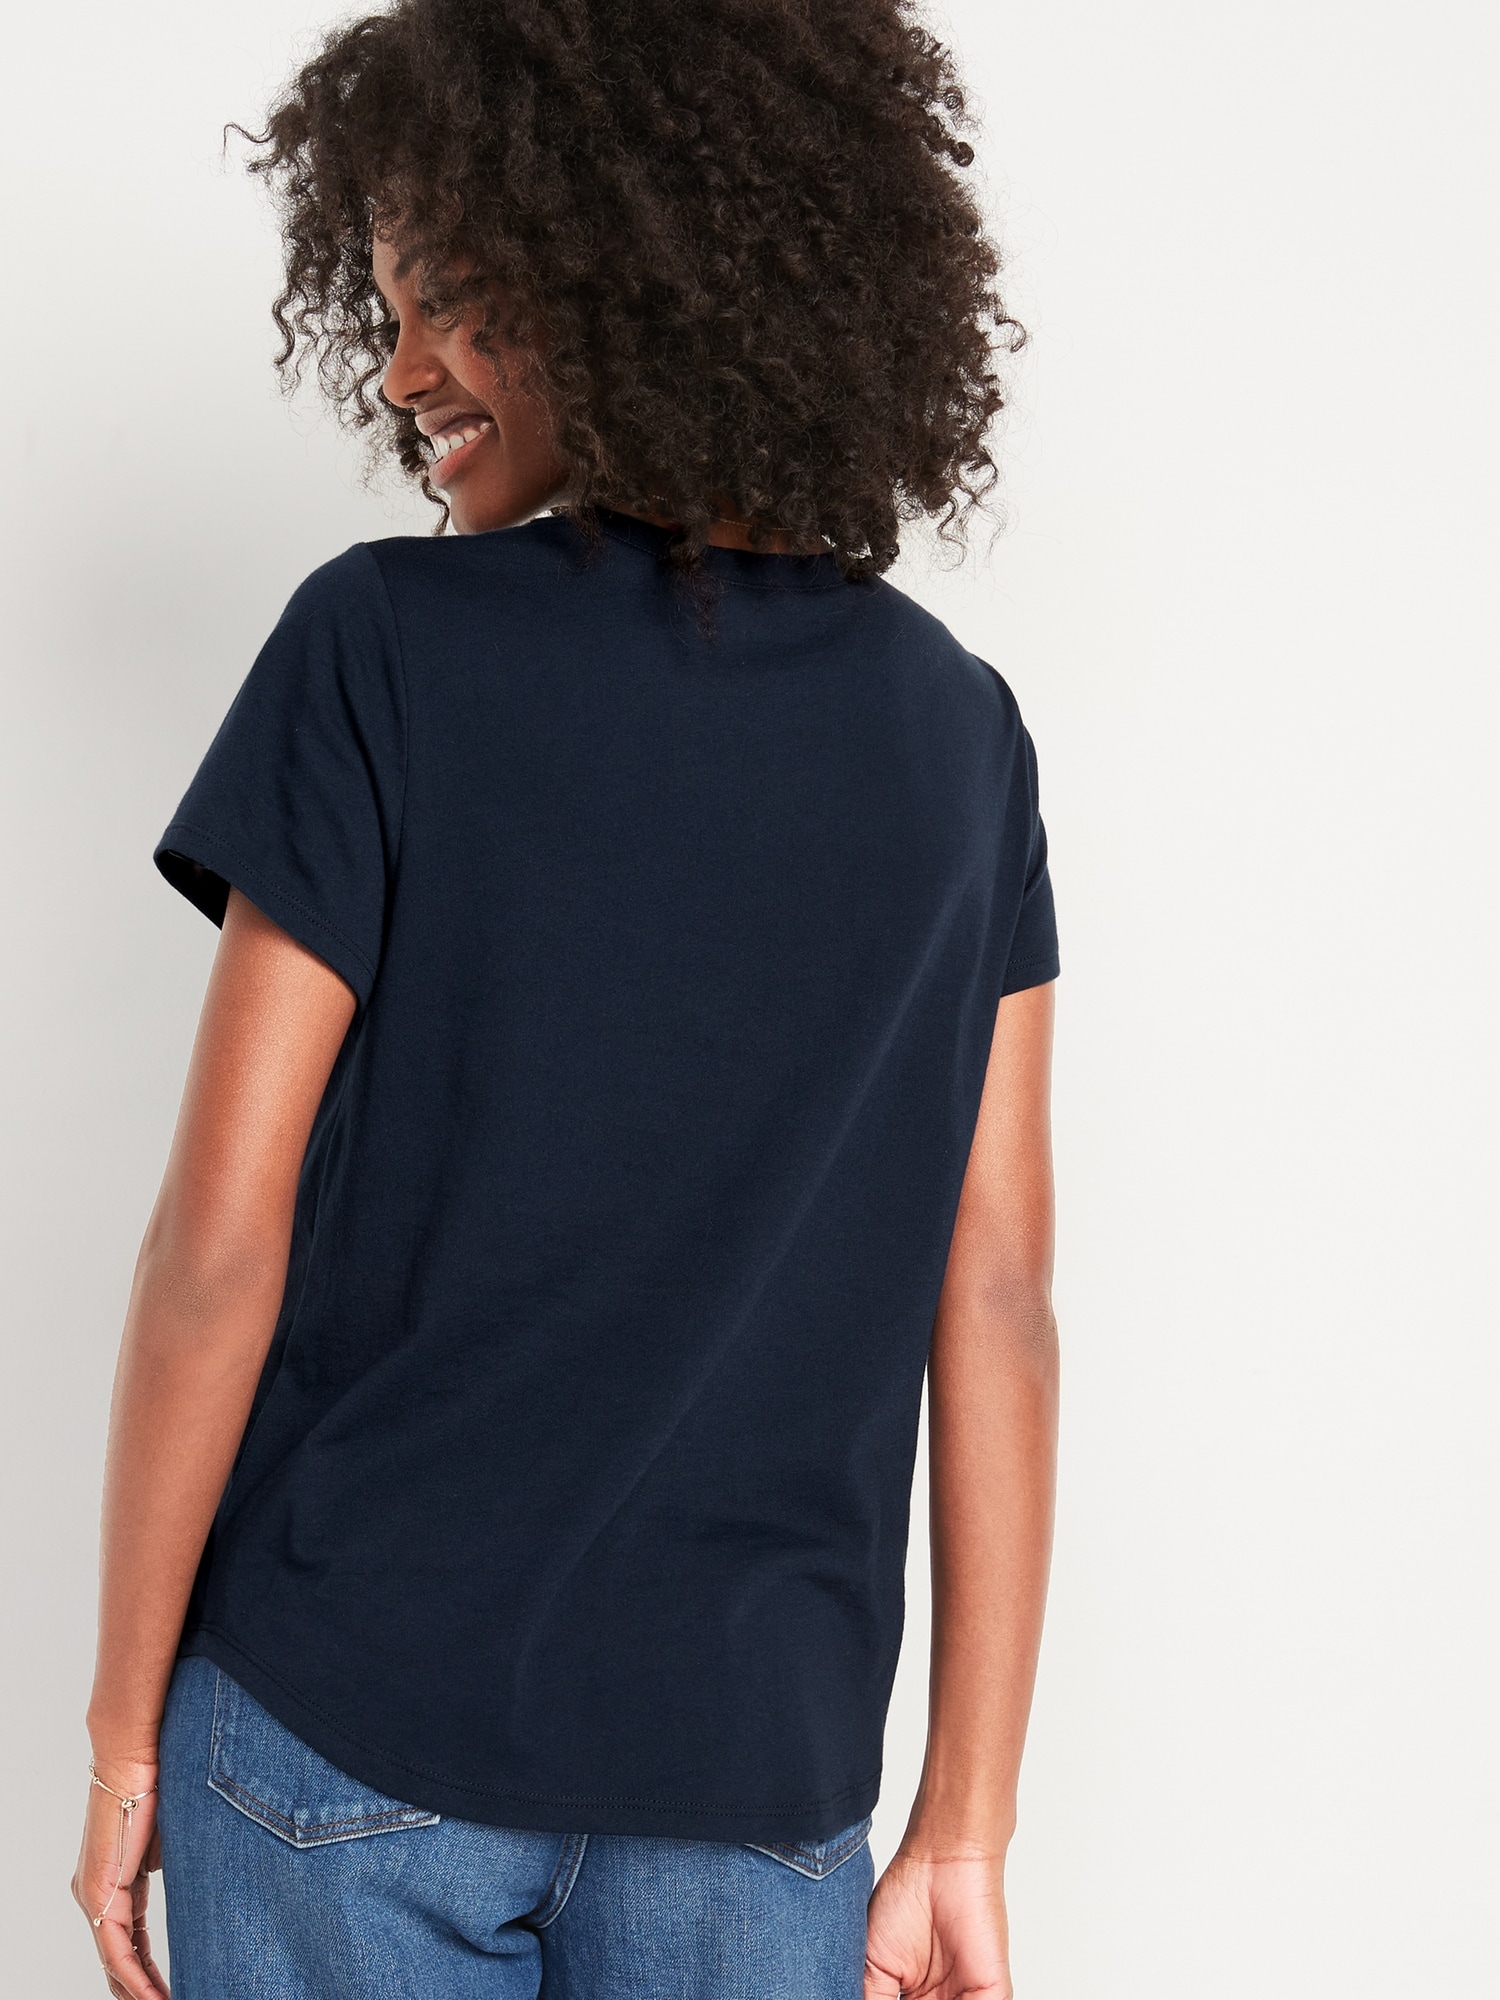 EveryWear Matching Graphic T-Shirt for Women | Old Navy